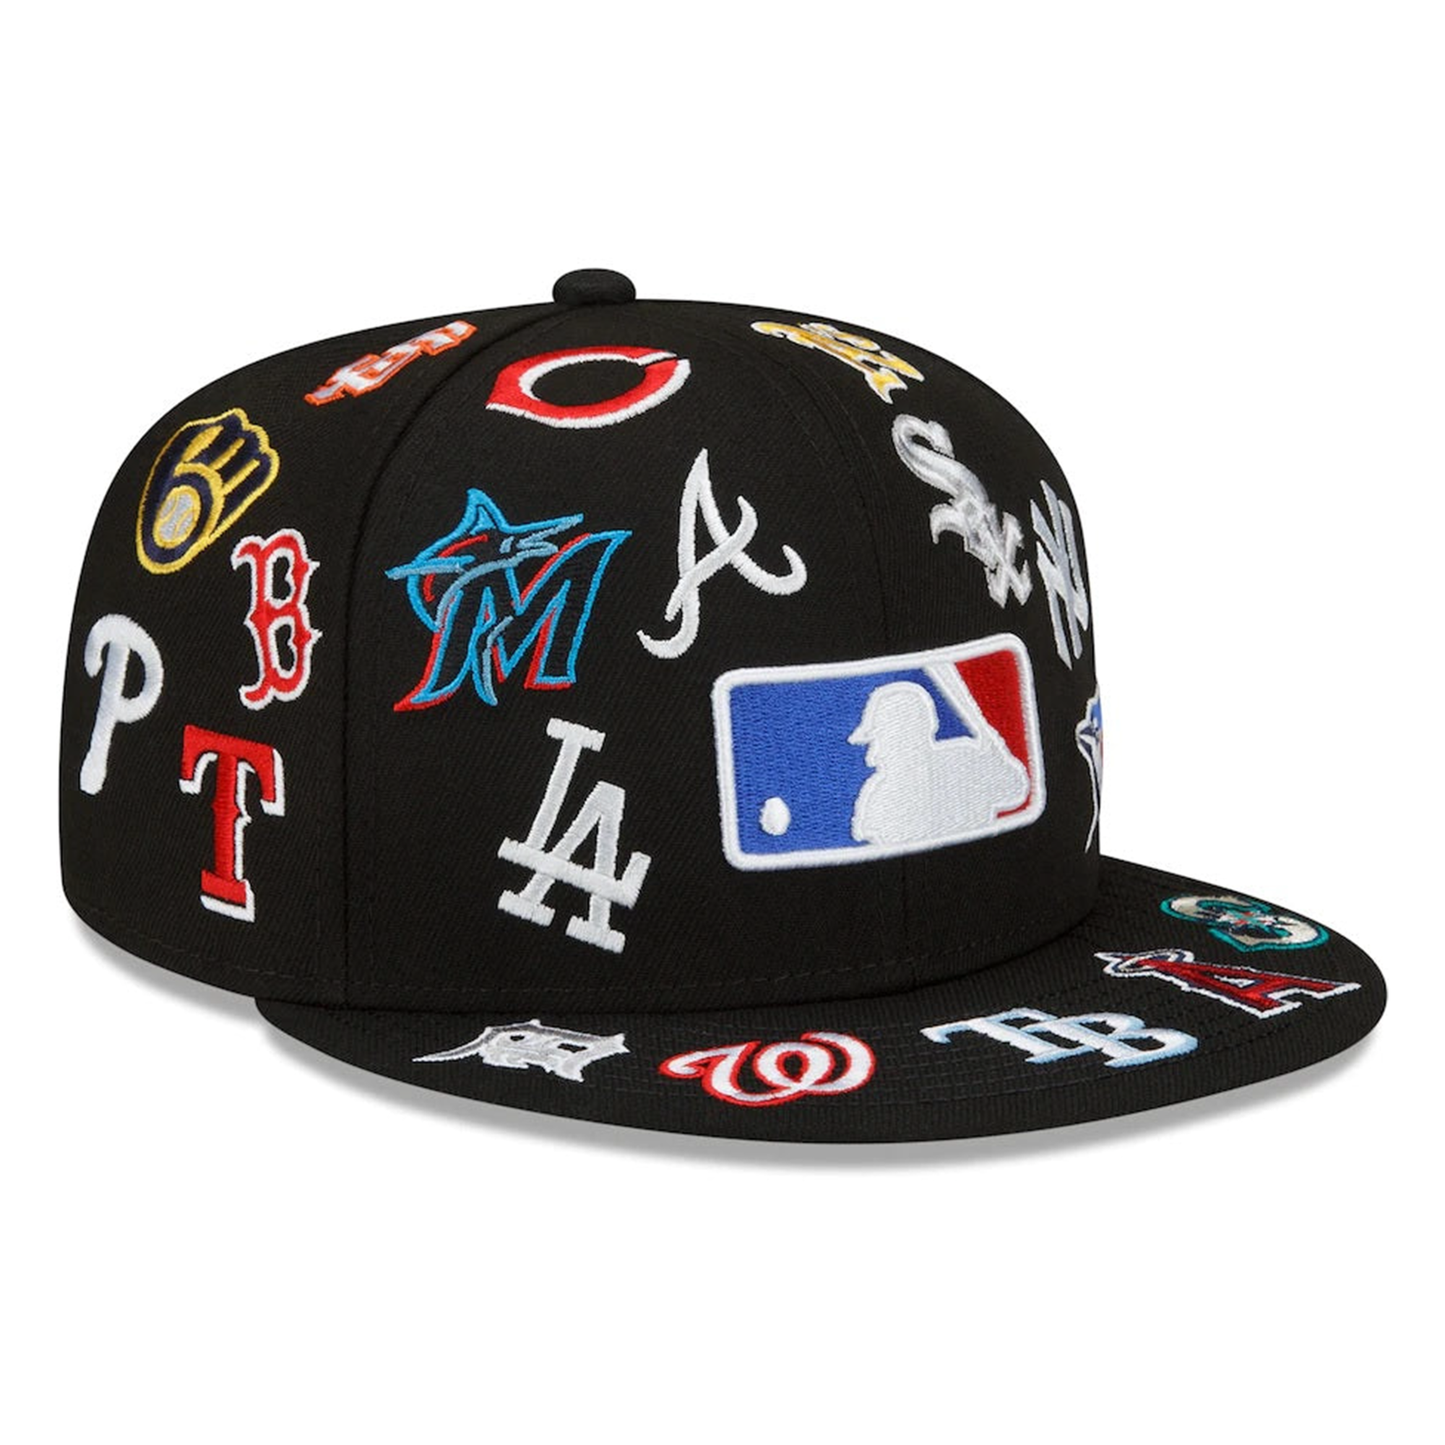 New Era 9FIFTY All Over MLB Snapback Sidepatch